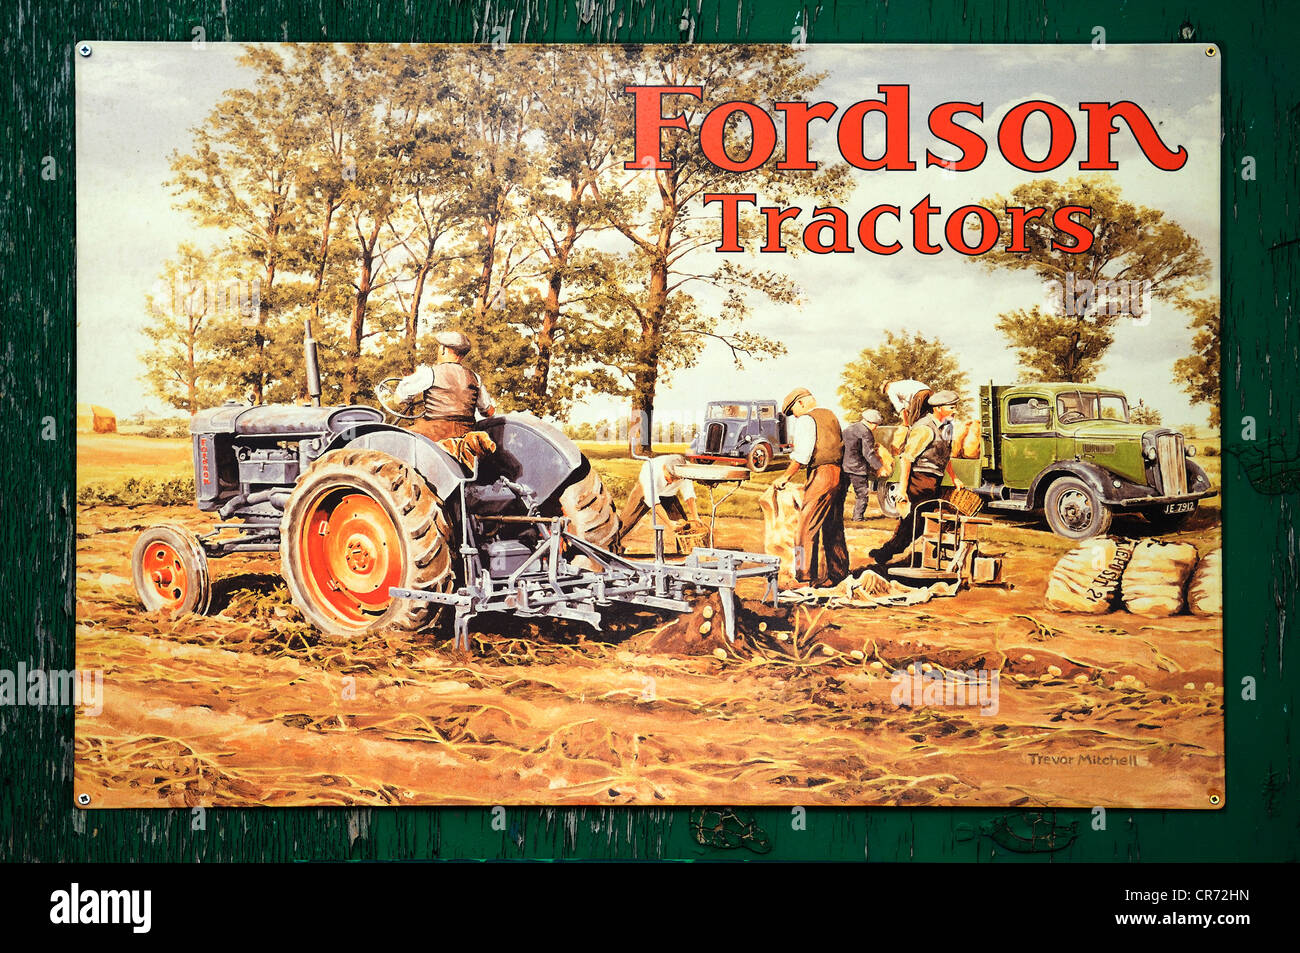 Old English advertising sign for tractors from the 1930s on a wooden wall at the port of Exeter, Devon, England, United Kingdom Stock Photo